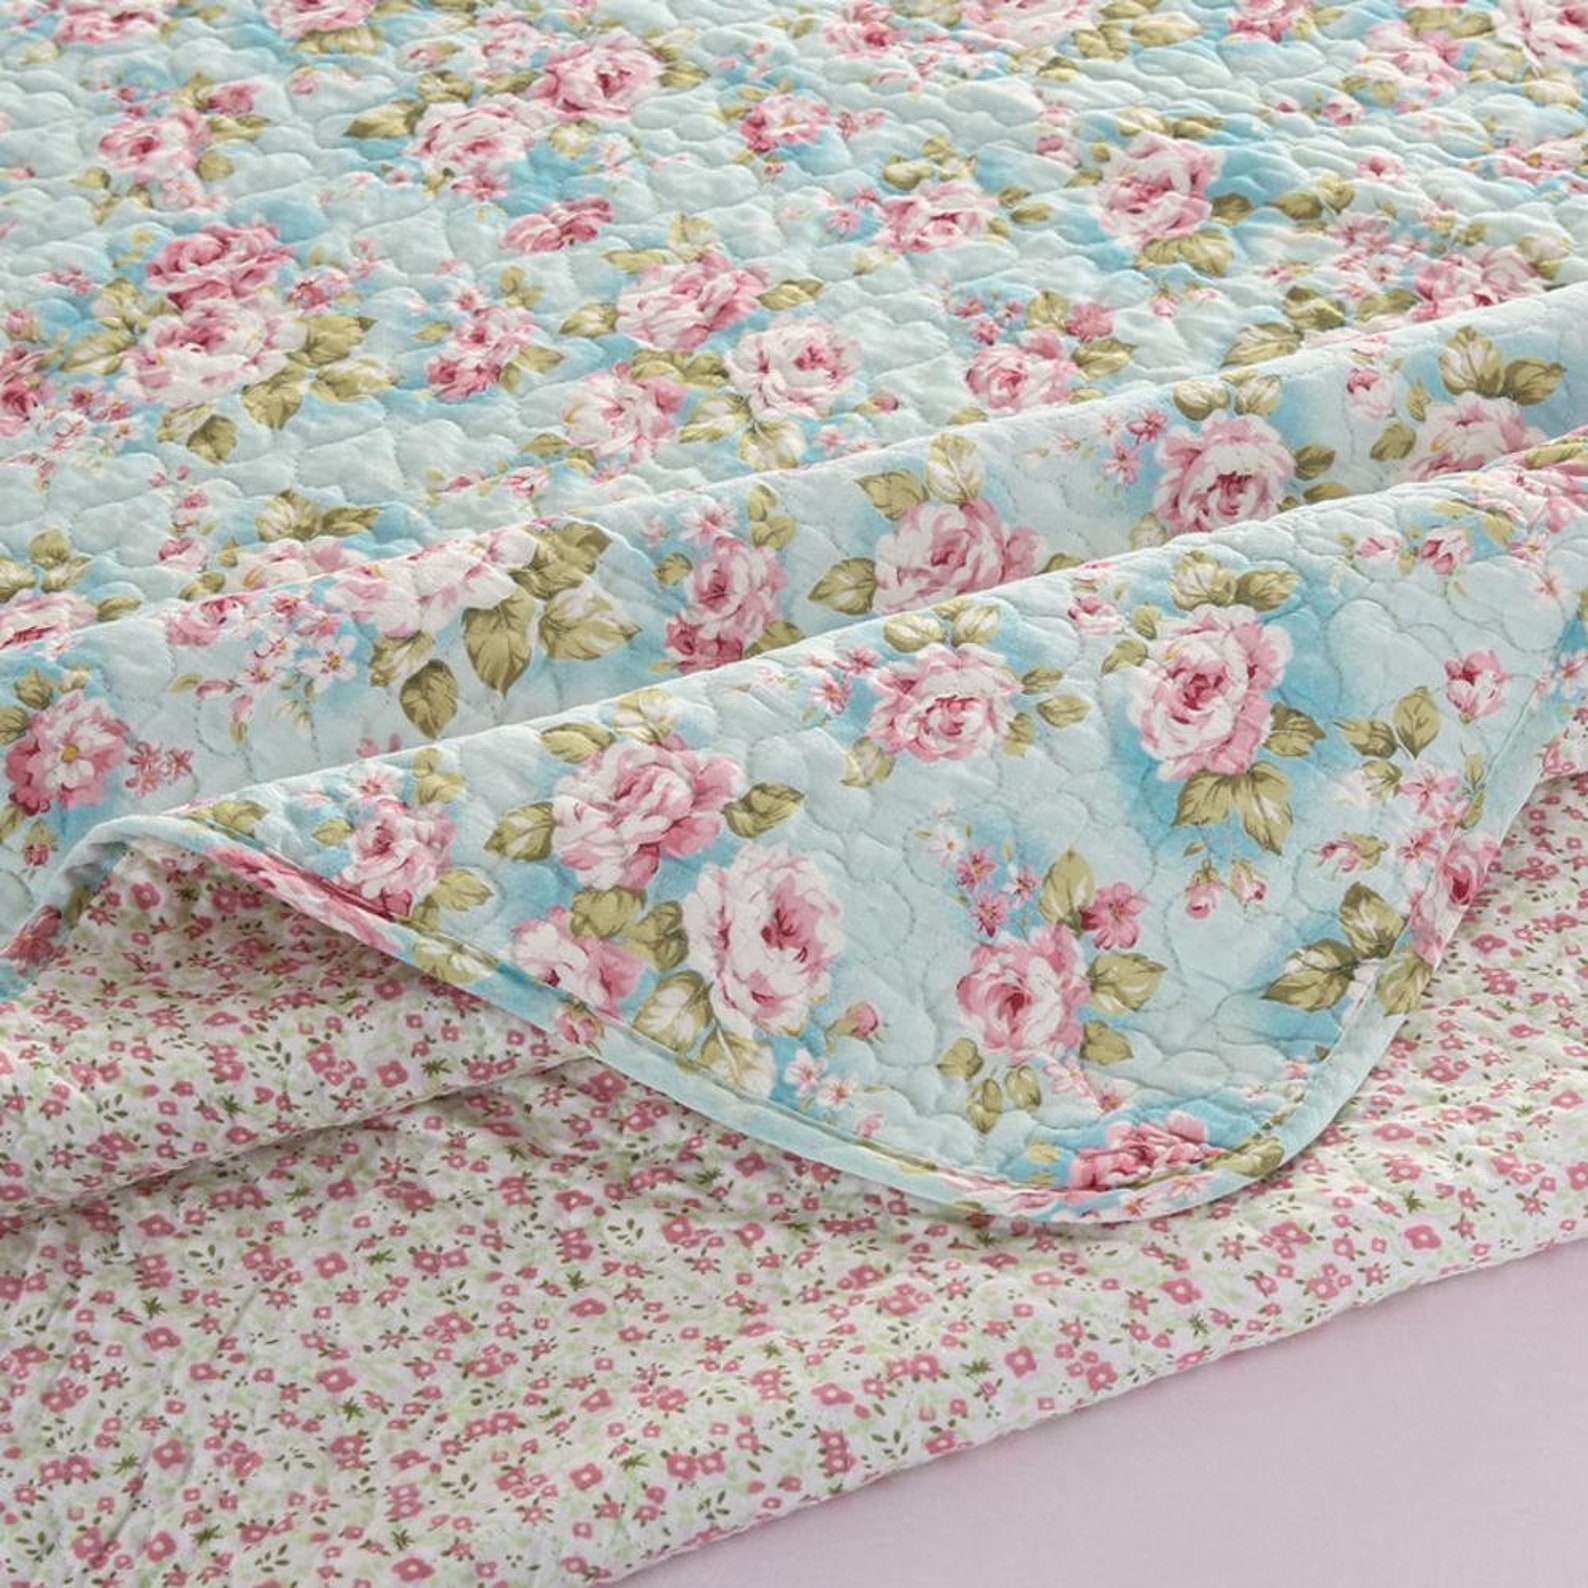 100% High-density Cotton Embroidered Quilt Bedspread - Etsy